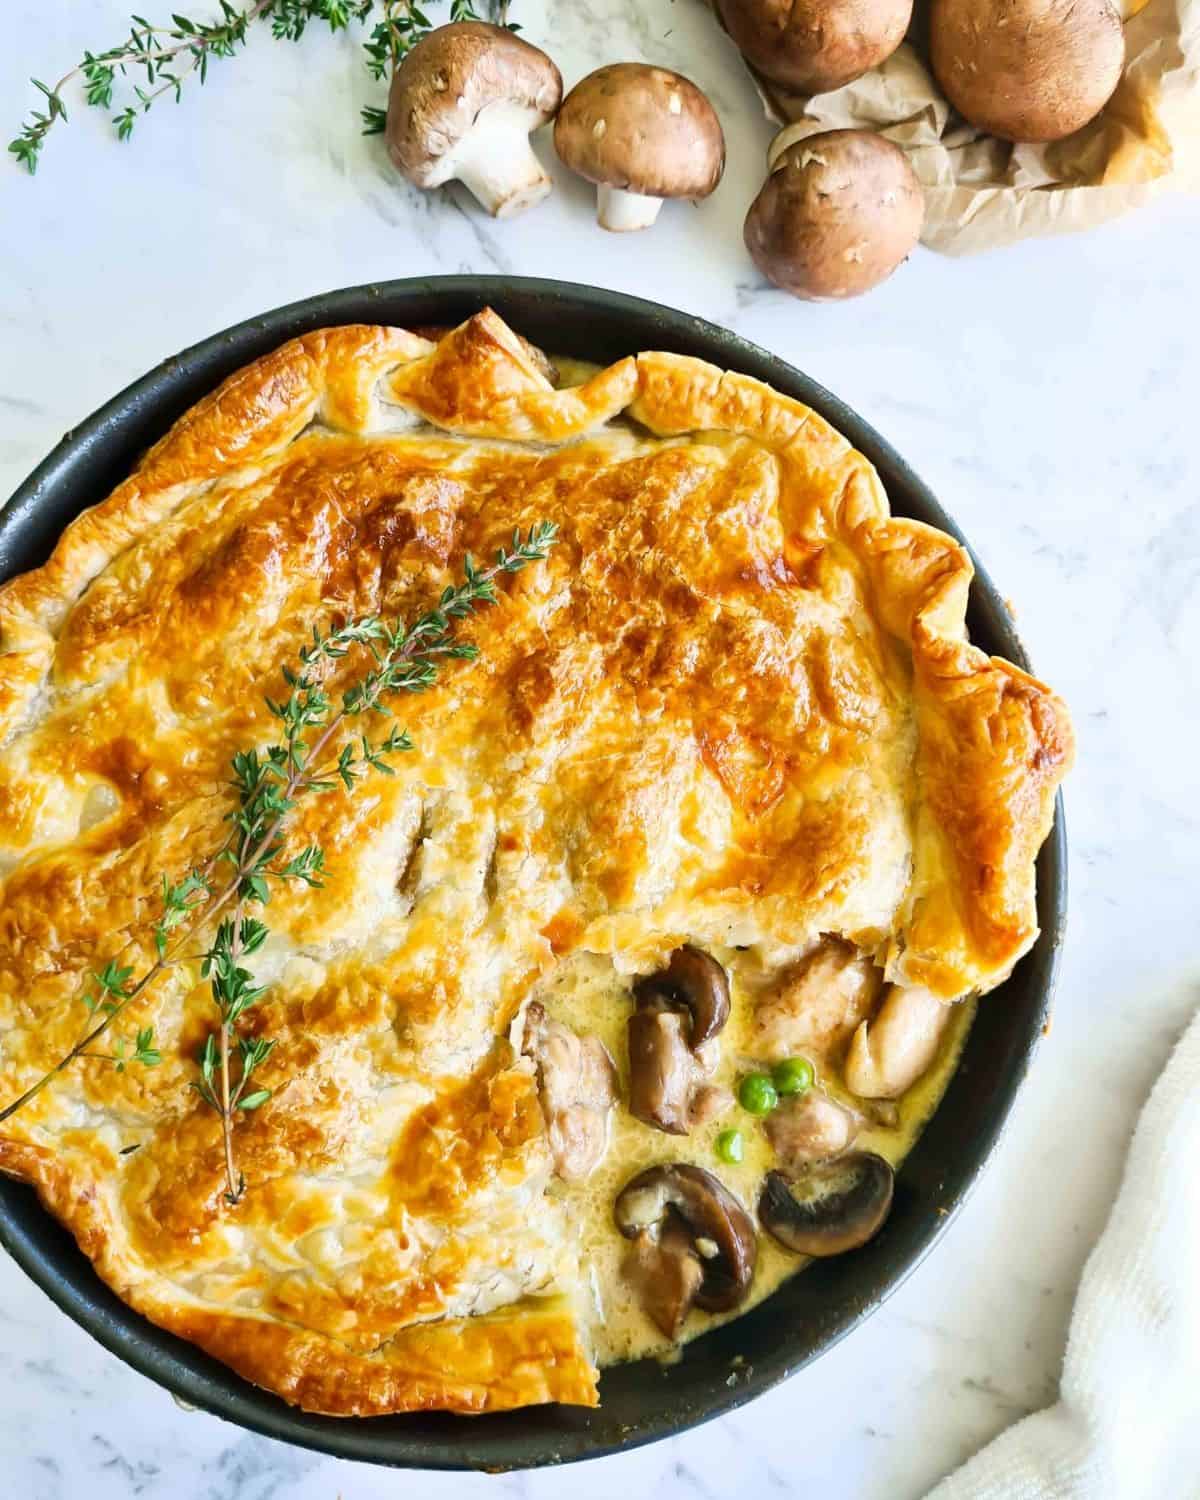 Chicken and mushroom pot pie with a portion of the pastry lifted showing creamy filling.